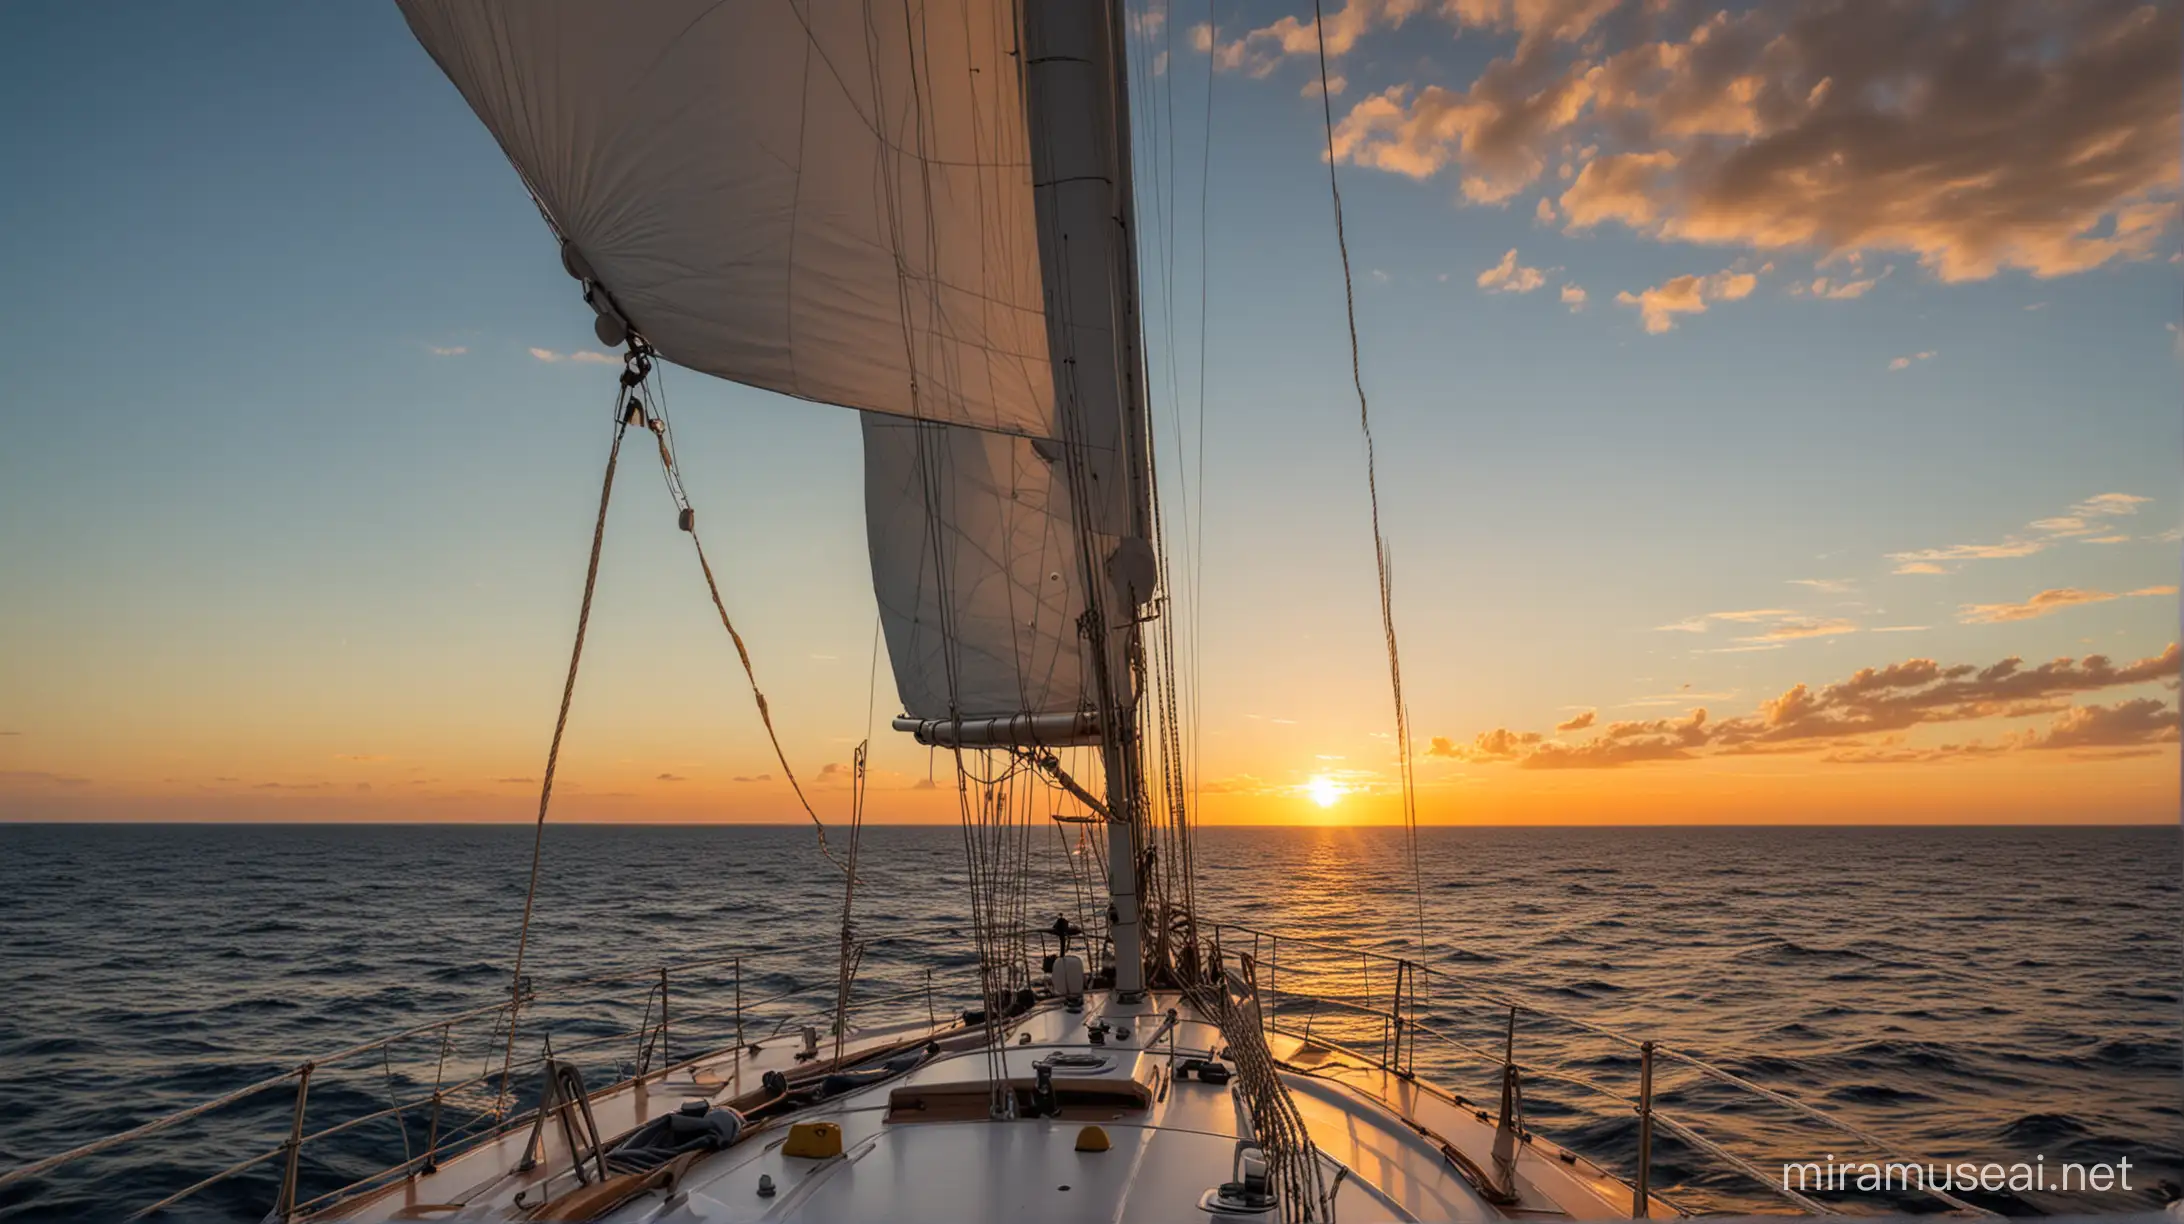 Sunset Sailing on the Gulf of Mexico HighResolution Nikon CloseUp Deck View